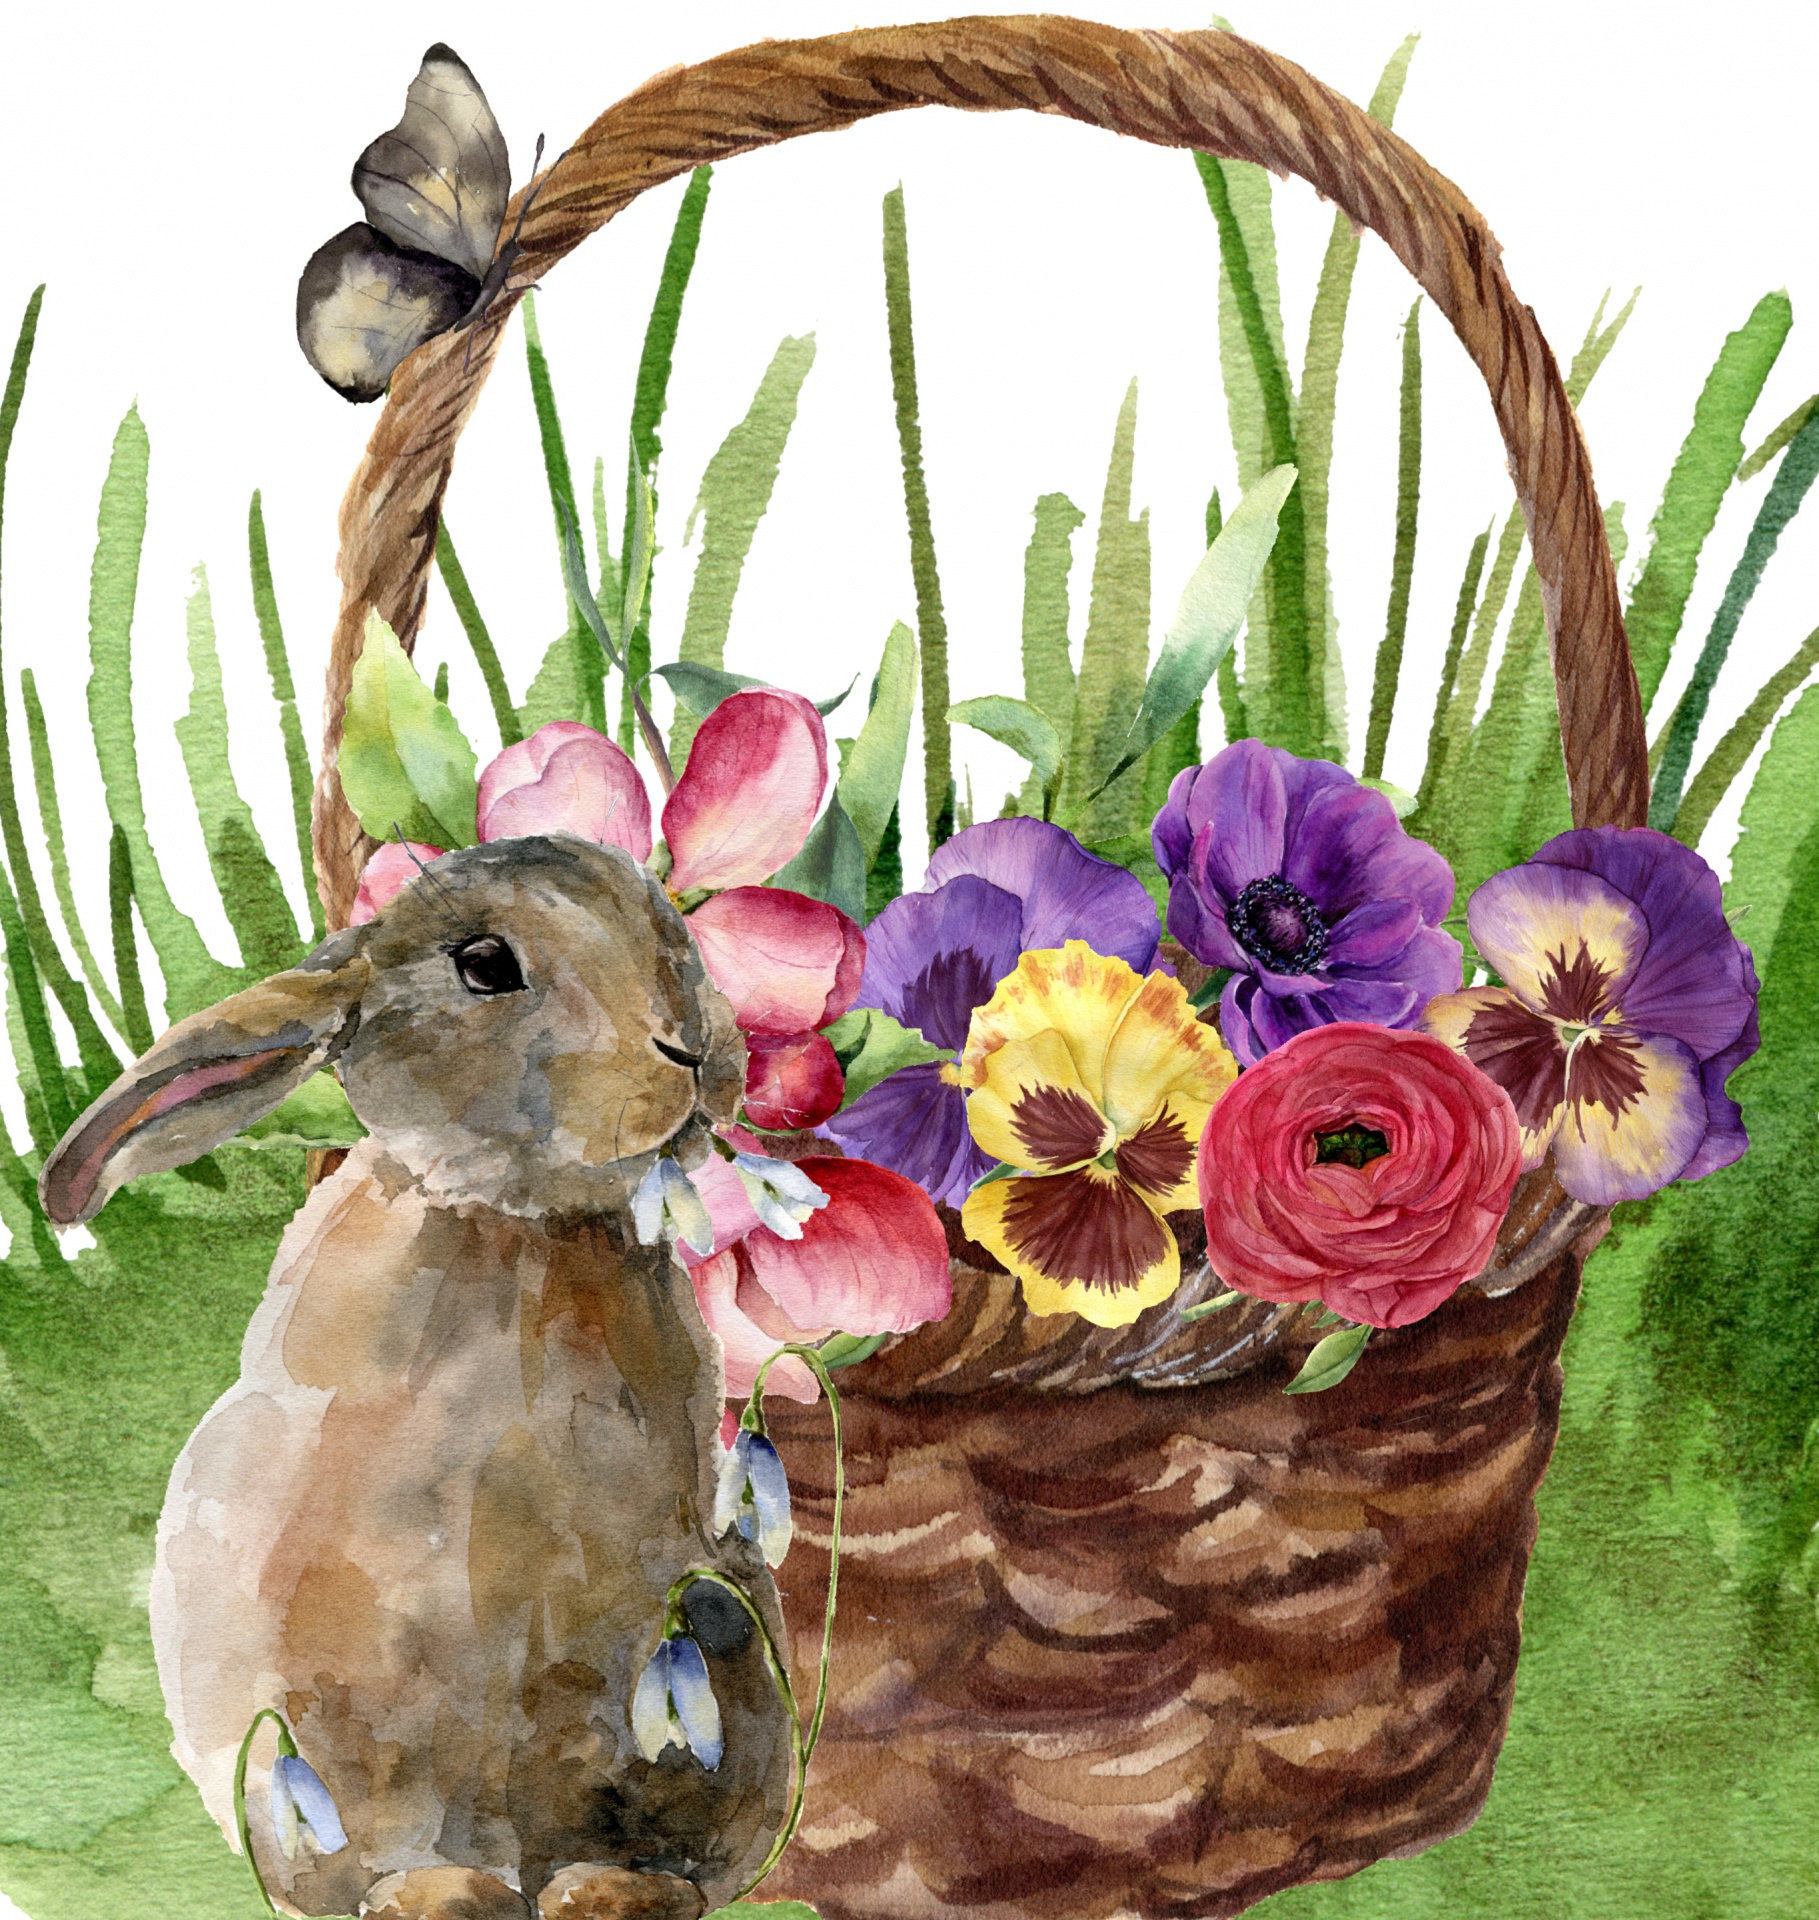 watercolor illustration of a basket full of flowers and an easter bunny standing near by